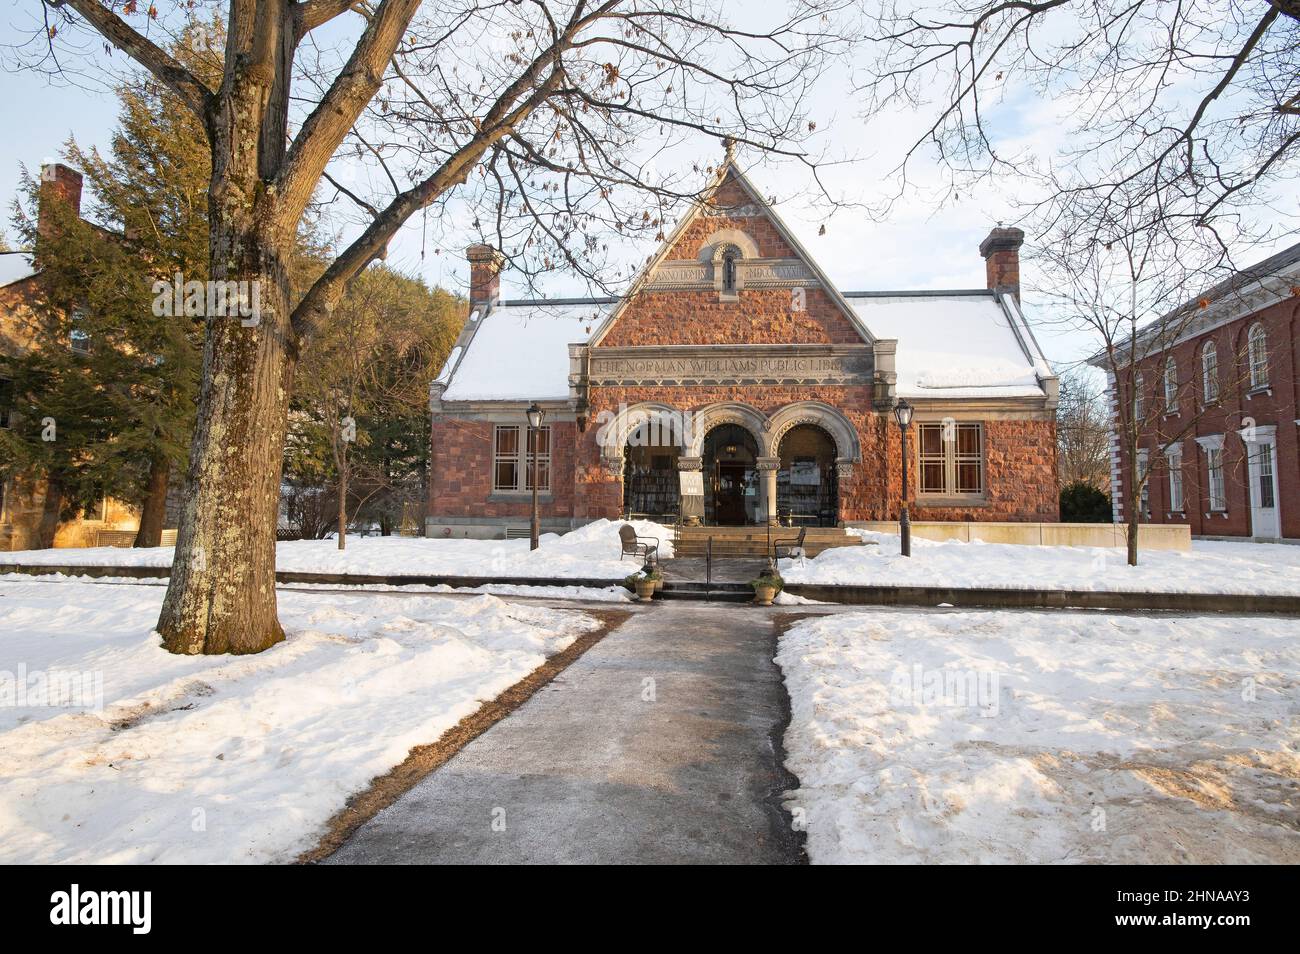 The Norman Williams Library (1880's) in Woodstock, Vermont, USA on a winter afternoon Stock Photo